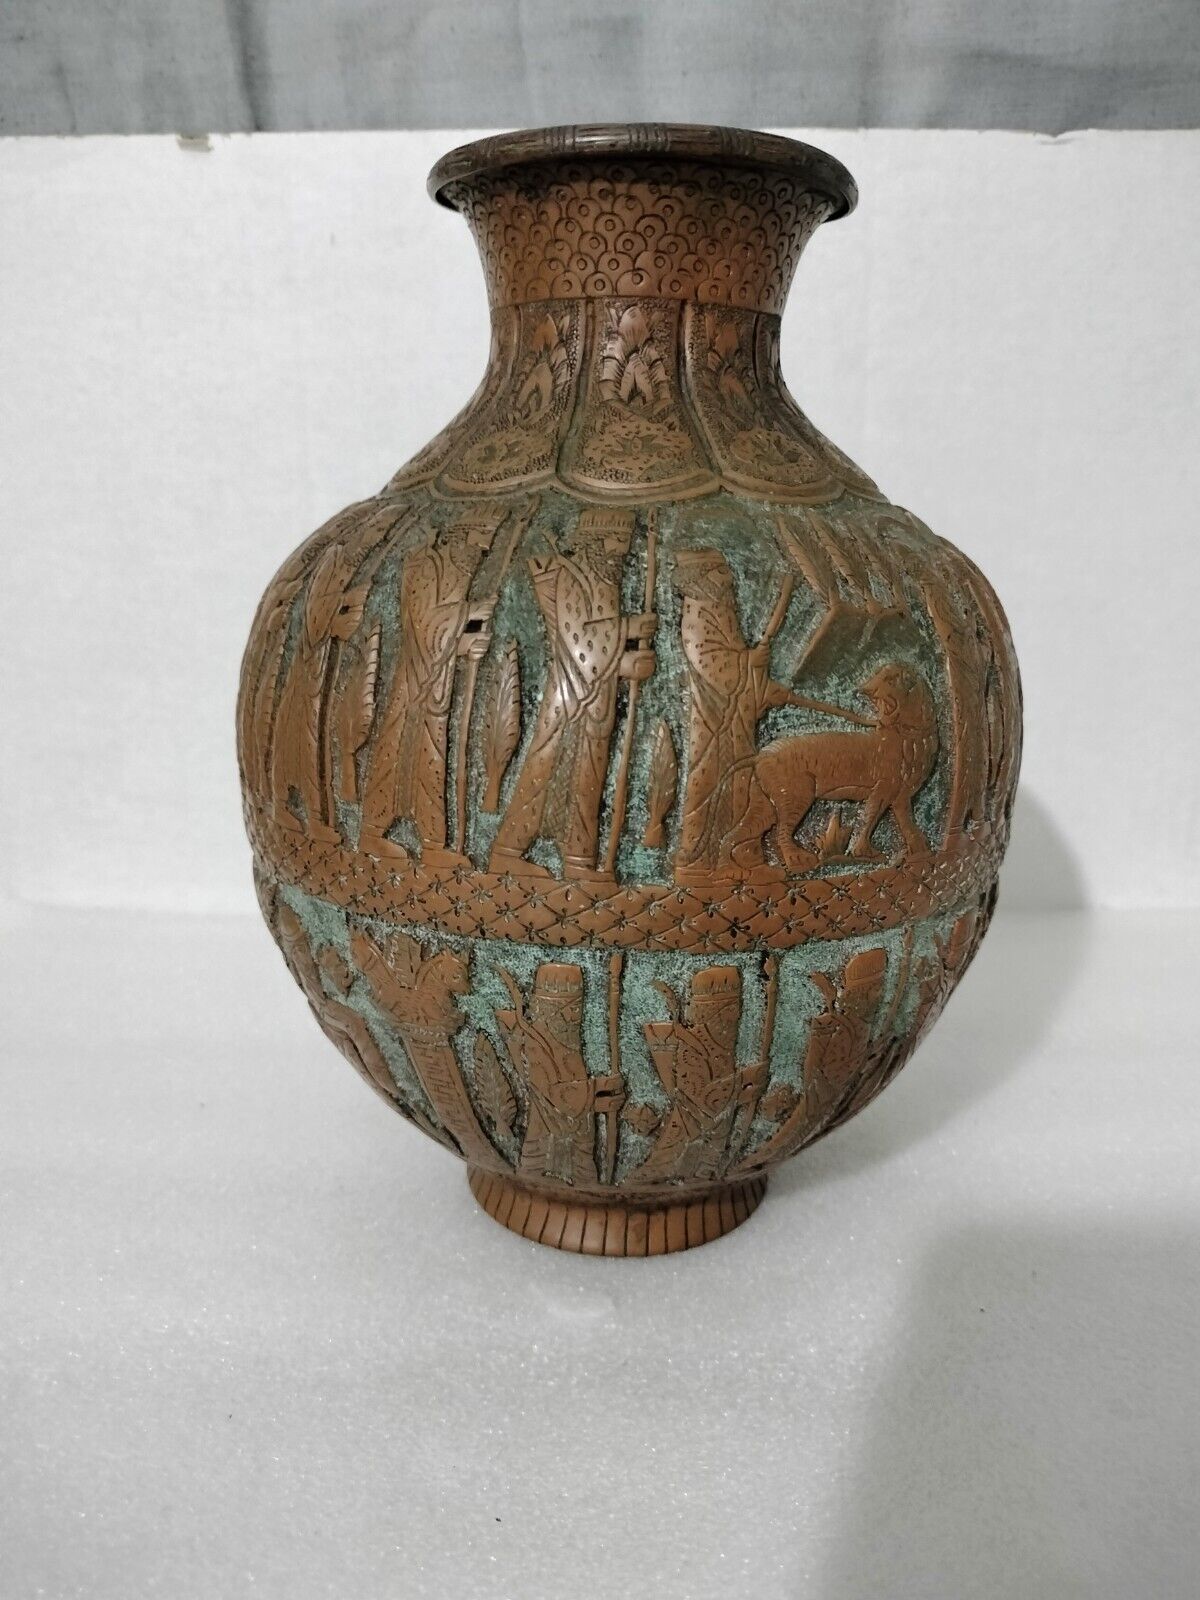 Exquisite 19th Century Persian Copper Vase - Heavy, Finely Detailed, Museum...